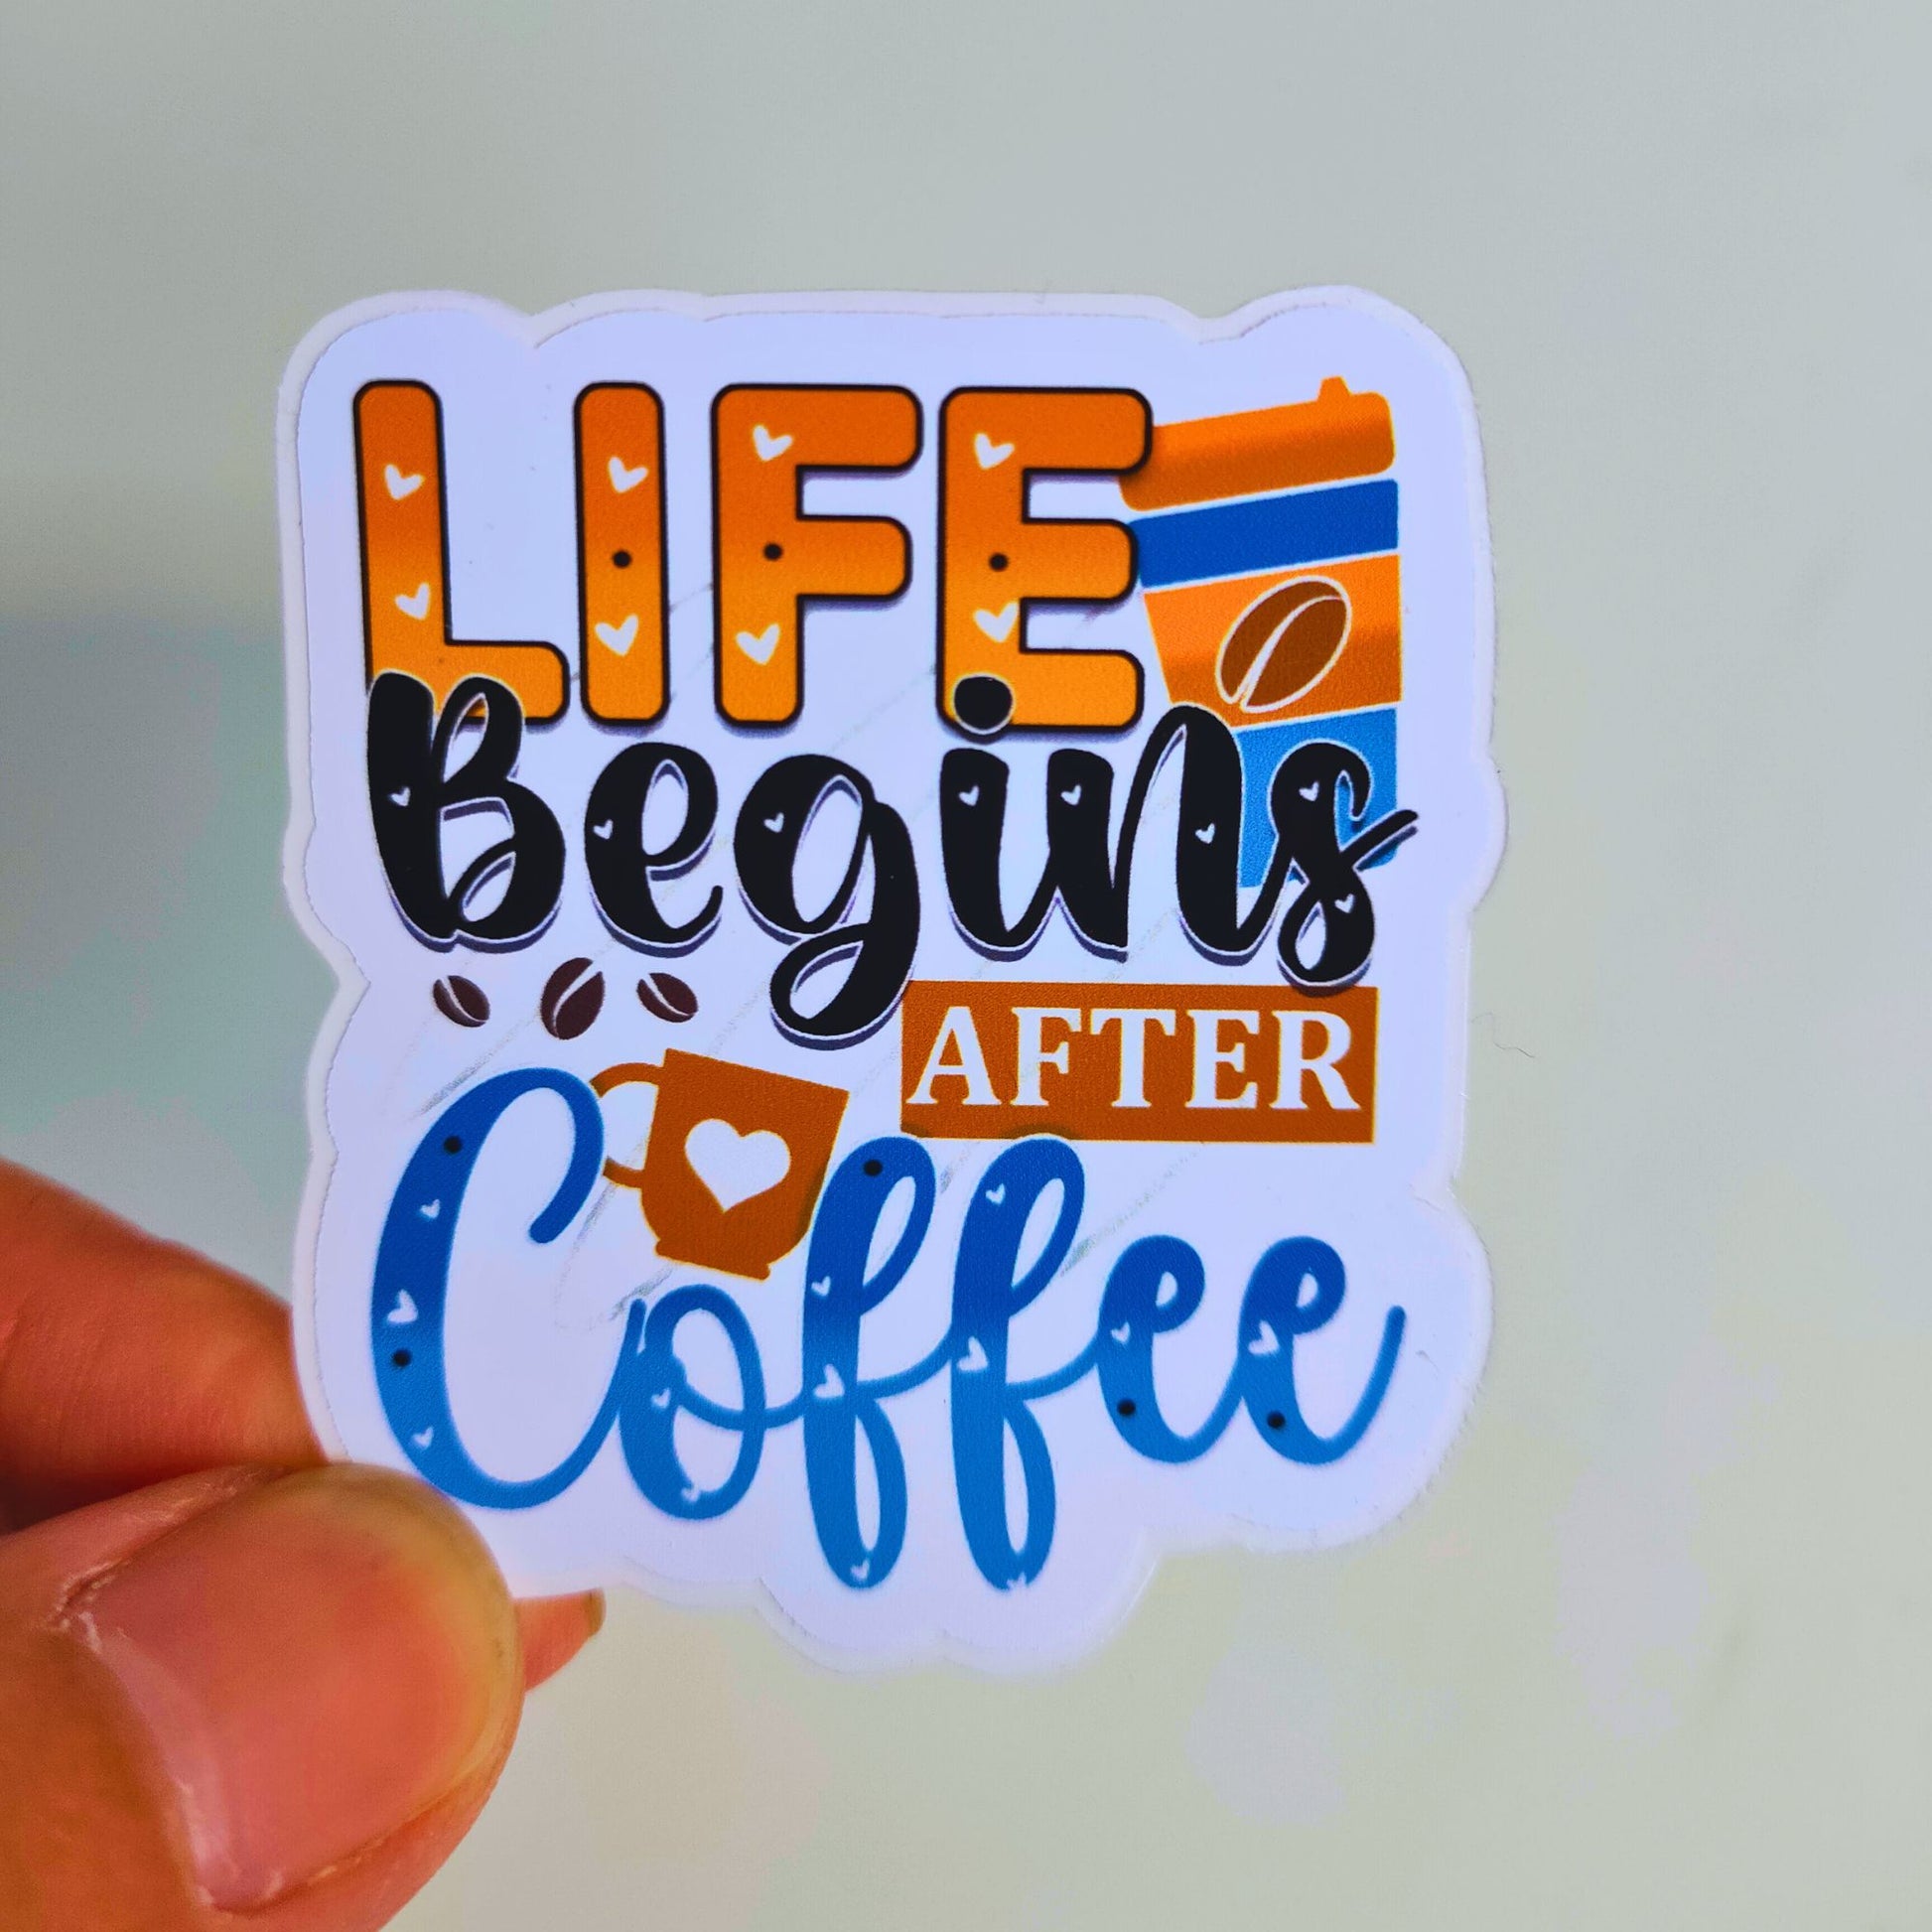 Life begins after coffee.